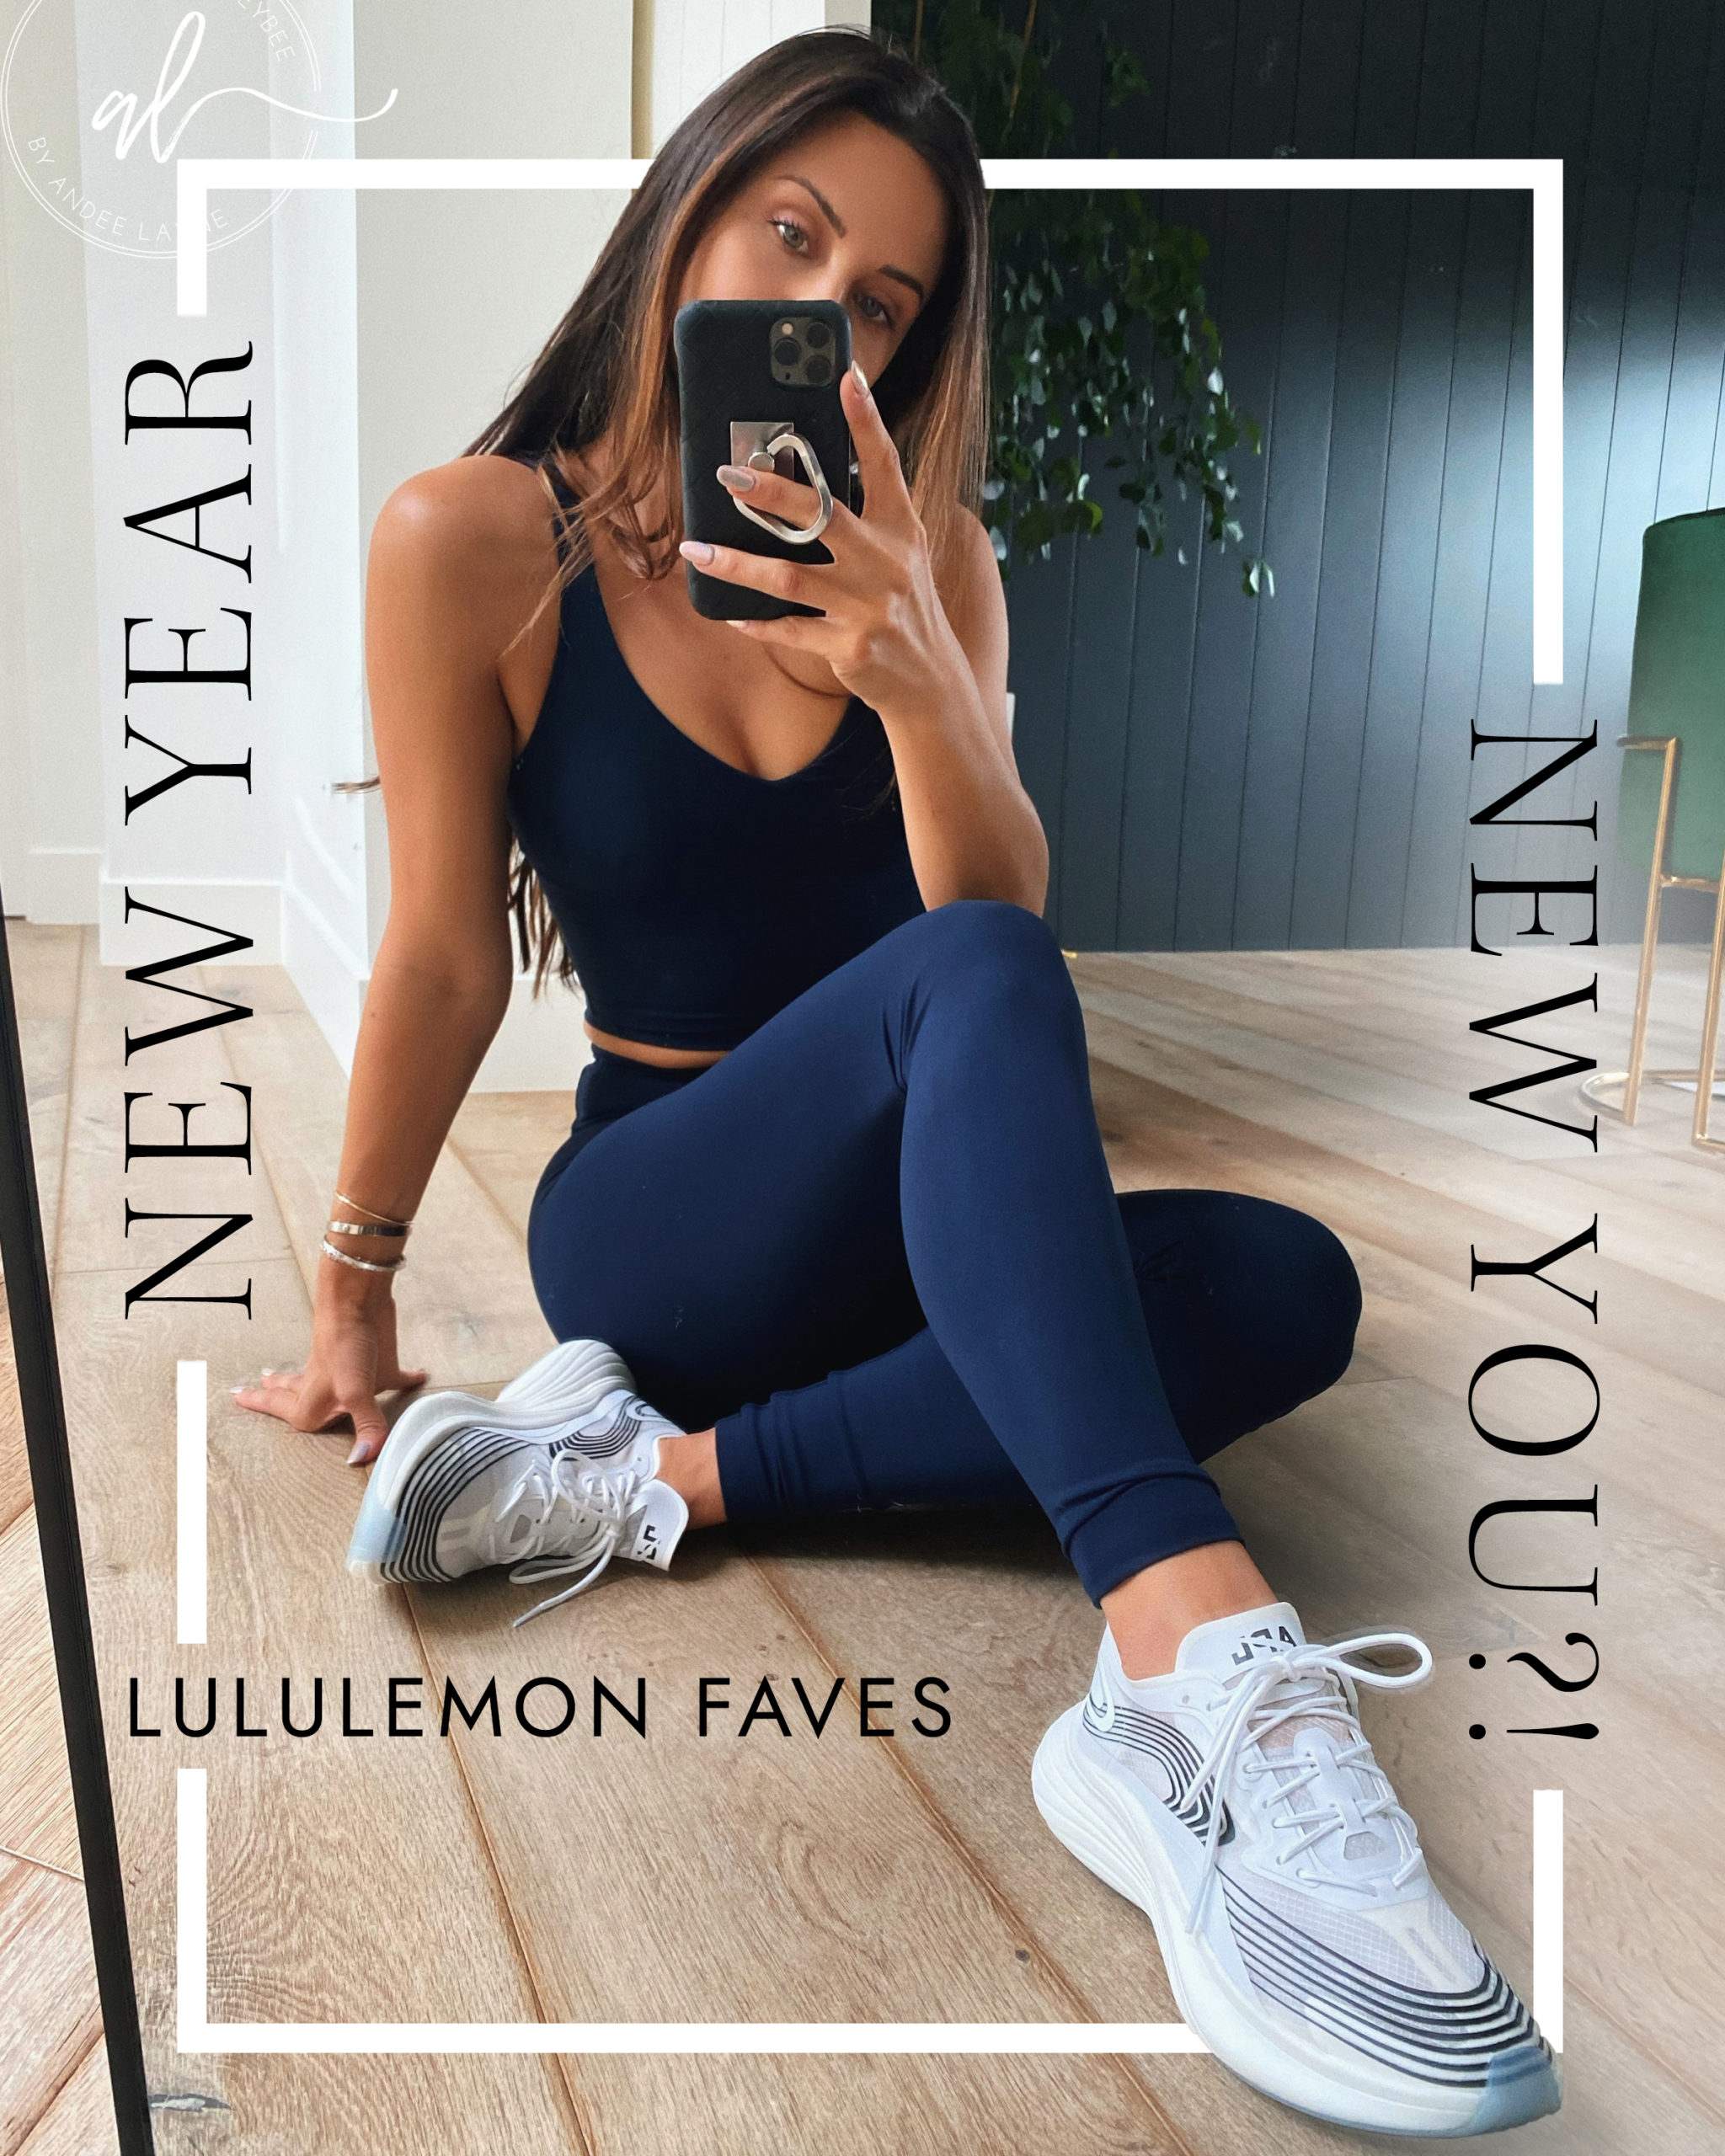 Lululemon Pieces I am Loving This Month - Andee Layne